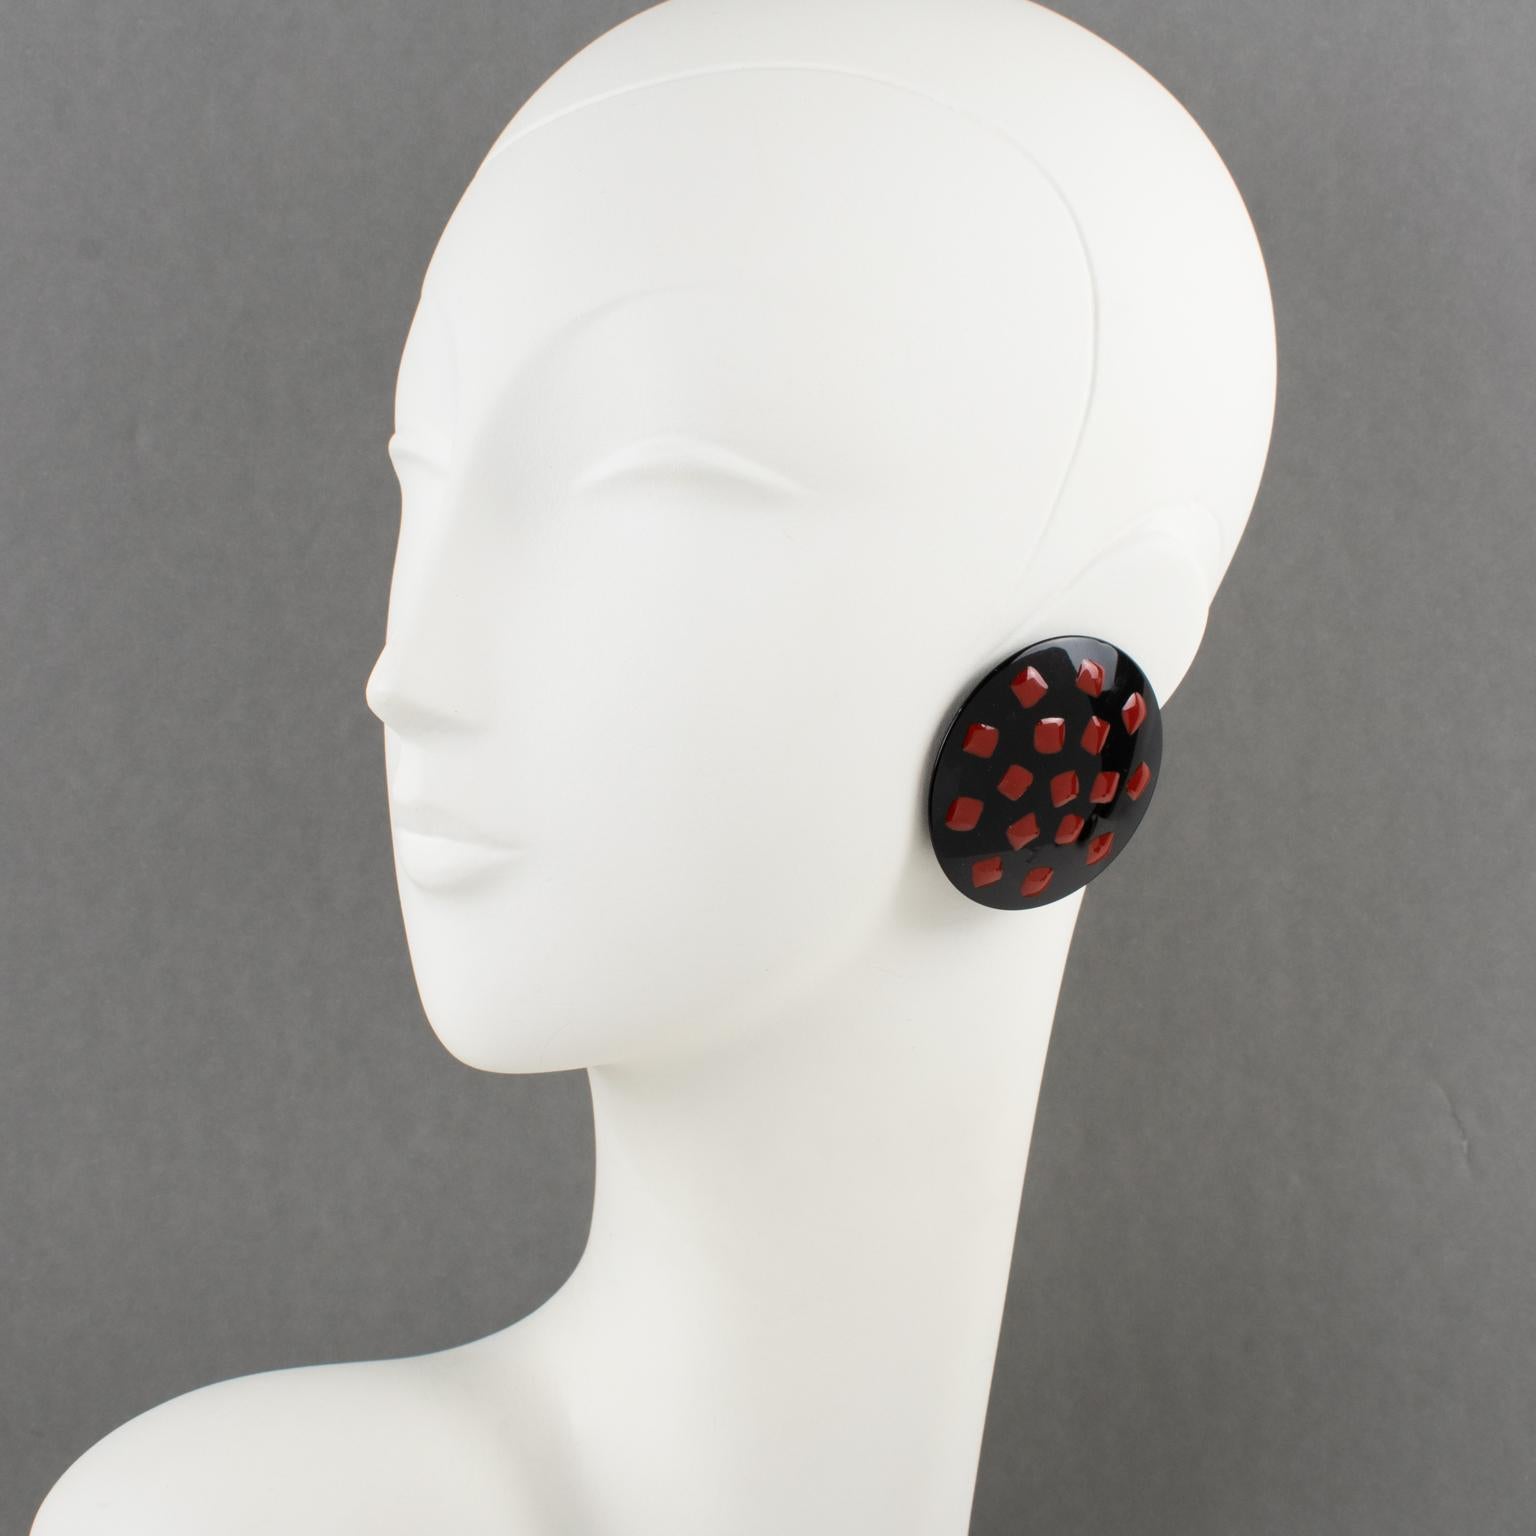 Lovely 1980s Missoni, Italy oversized Lucite or resin clip-on earrings. Hand-made domed dimensional rounded shape with red polka dots application over black background Lucite. Marked on fastenings 